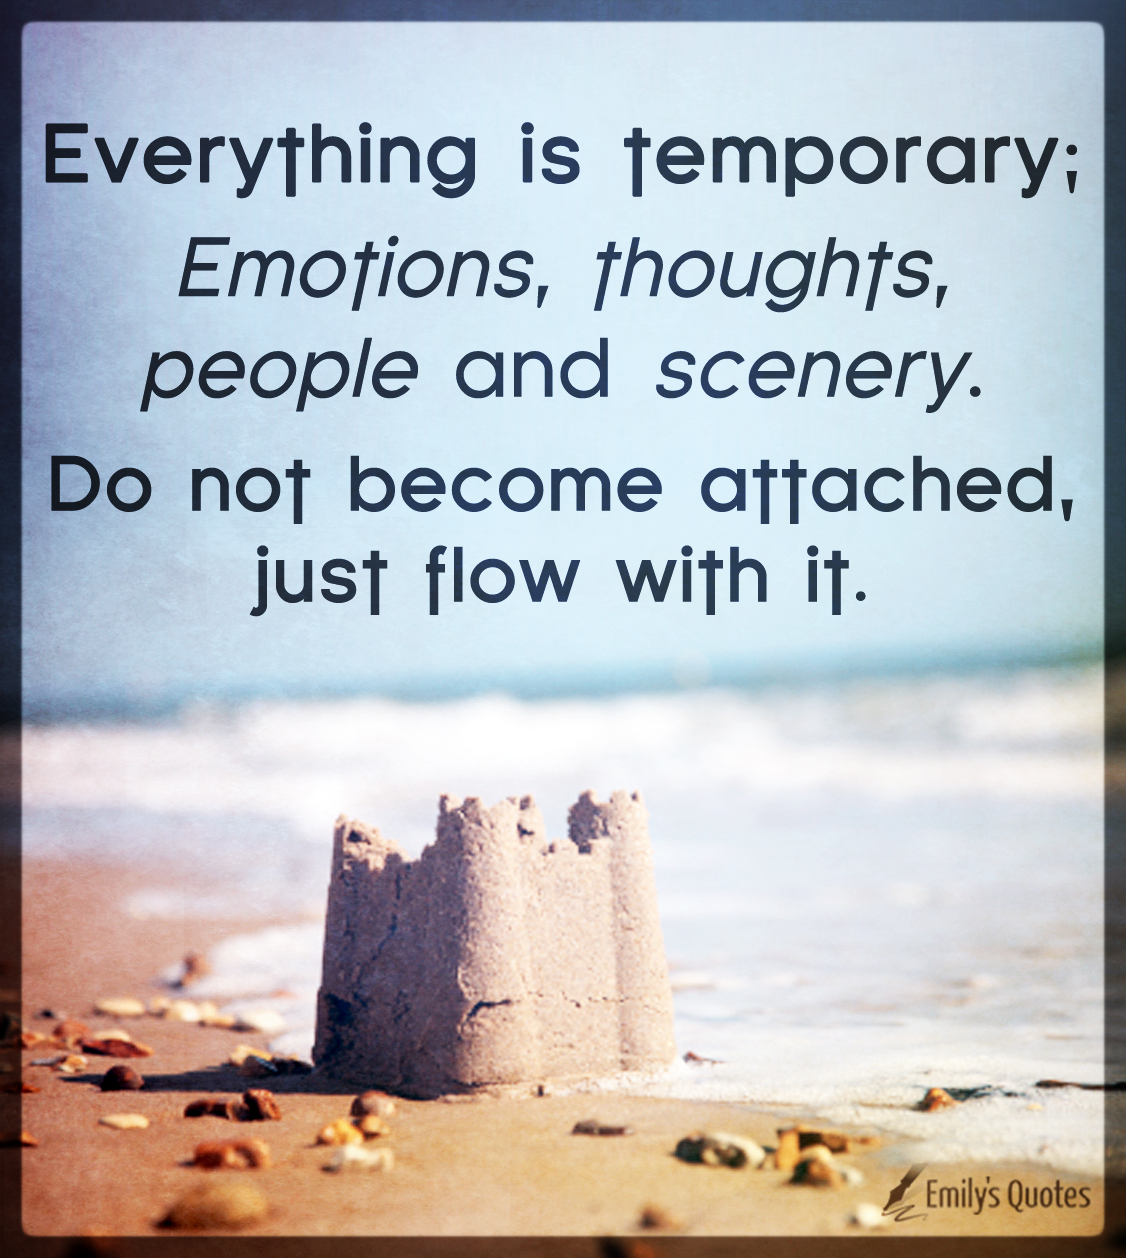 Everything is temporary; Emotions, thoughts, people and scenery. Do